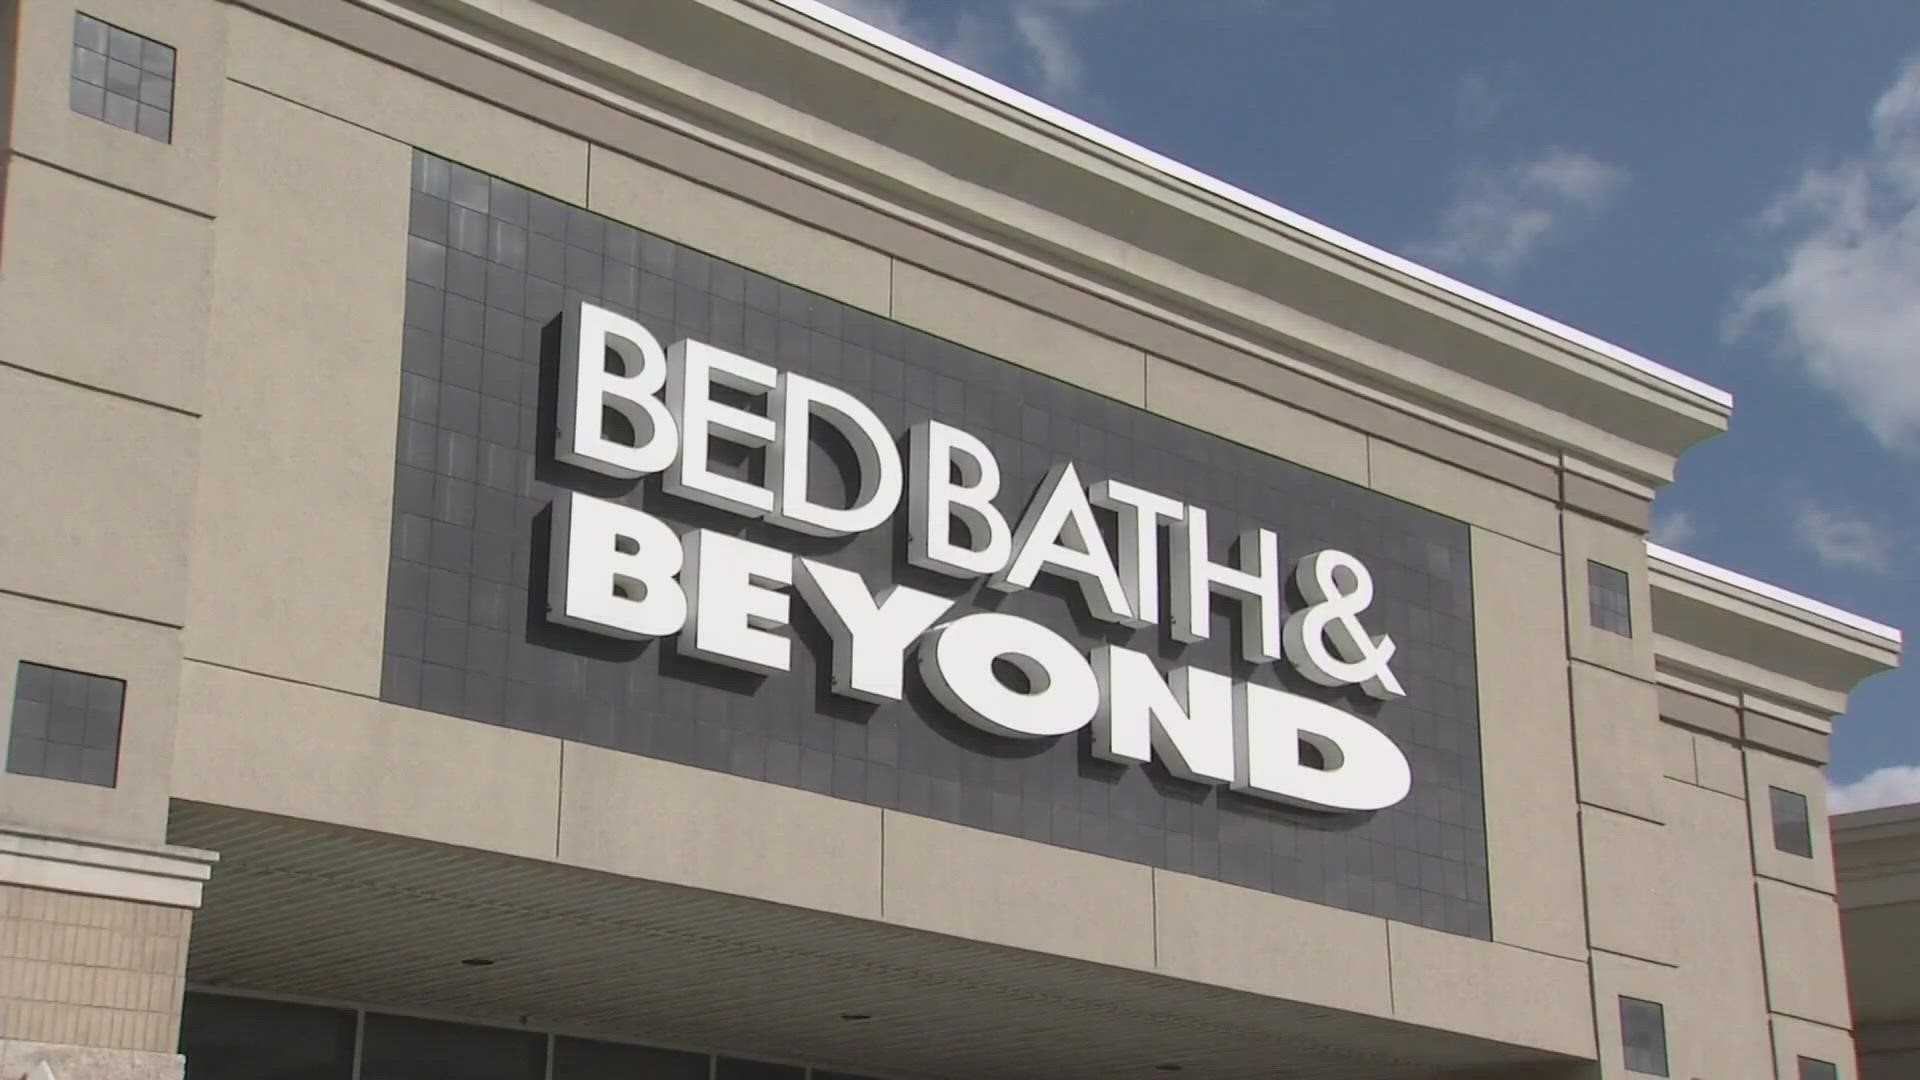 The latest list of store closings include Bed, Bath & Beyond locations across 41 states.